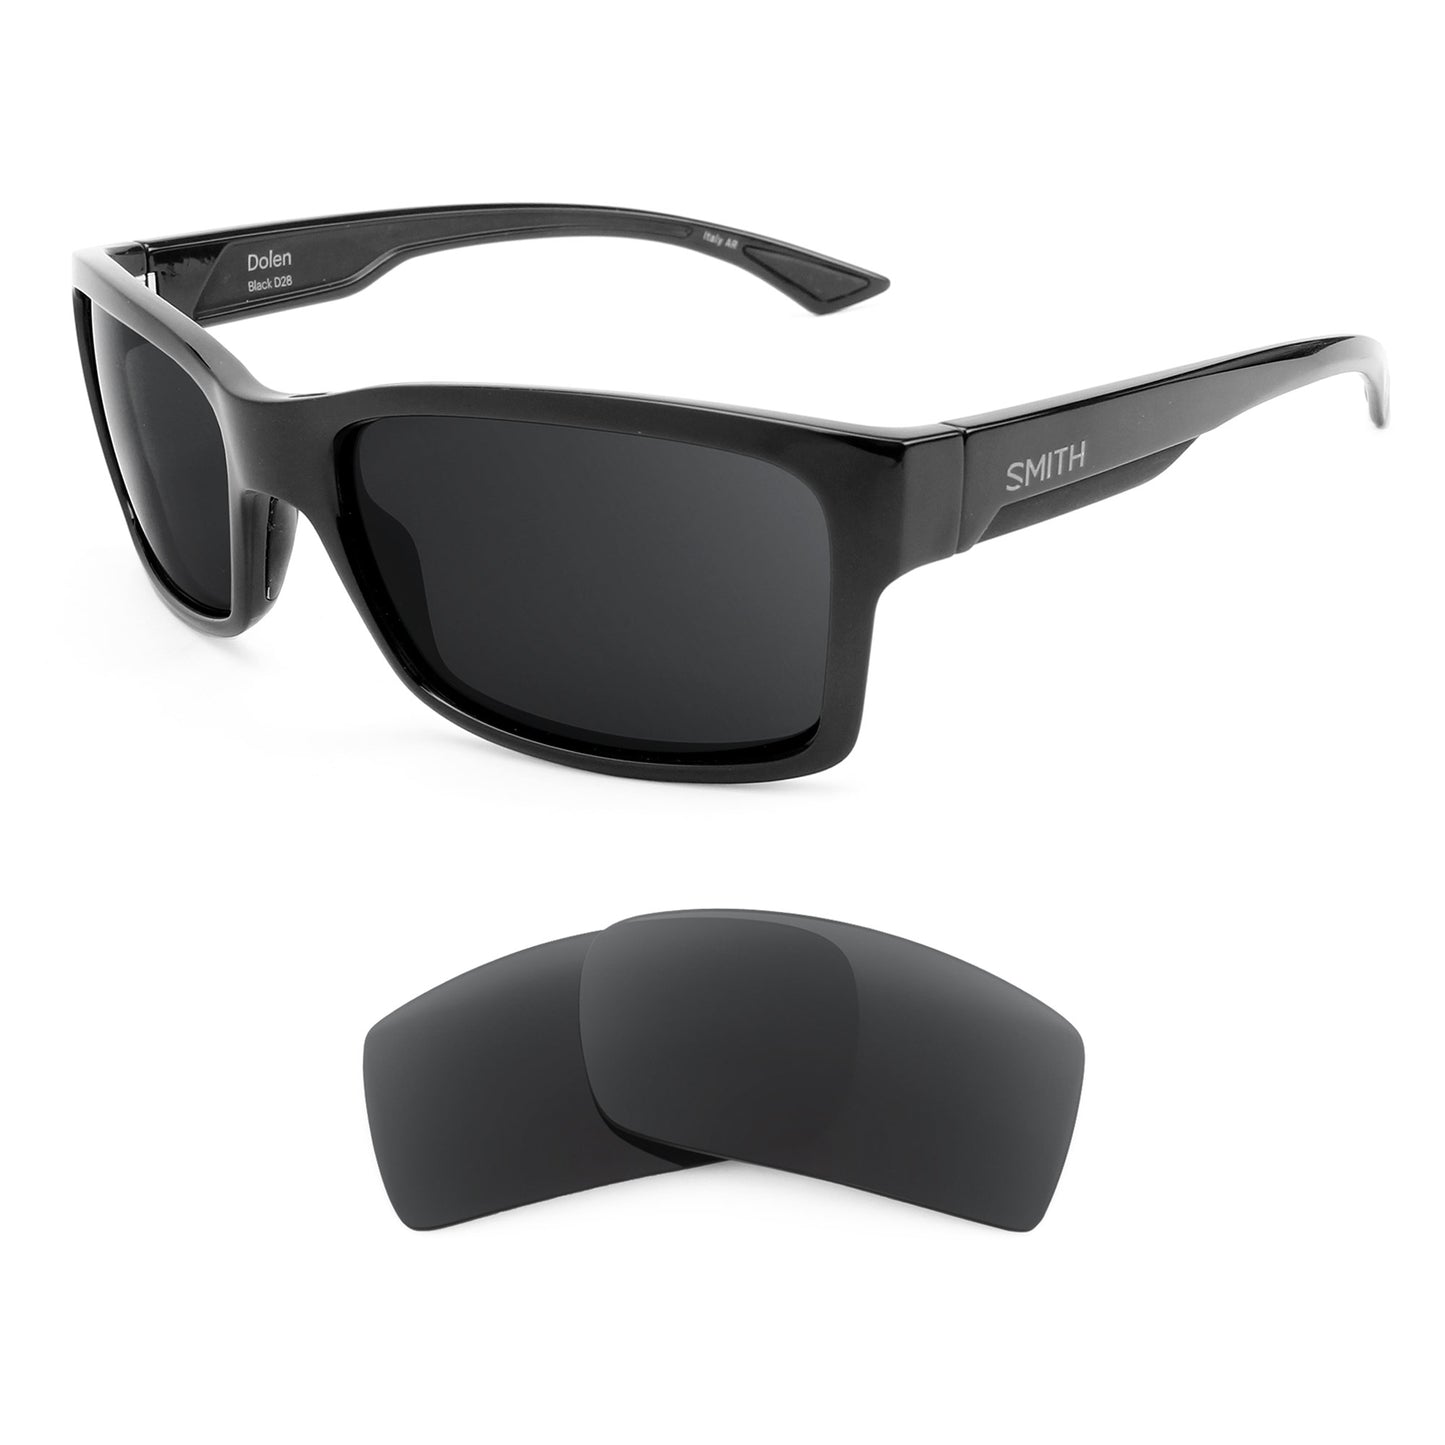 Smith Dolen sunglasses with replacement lenses